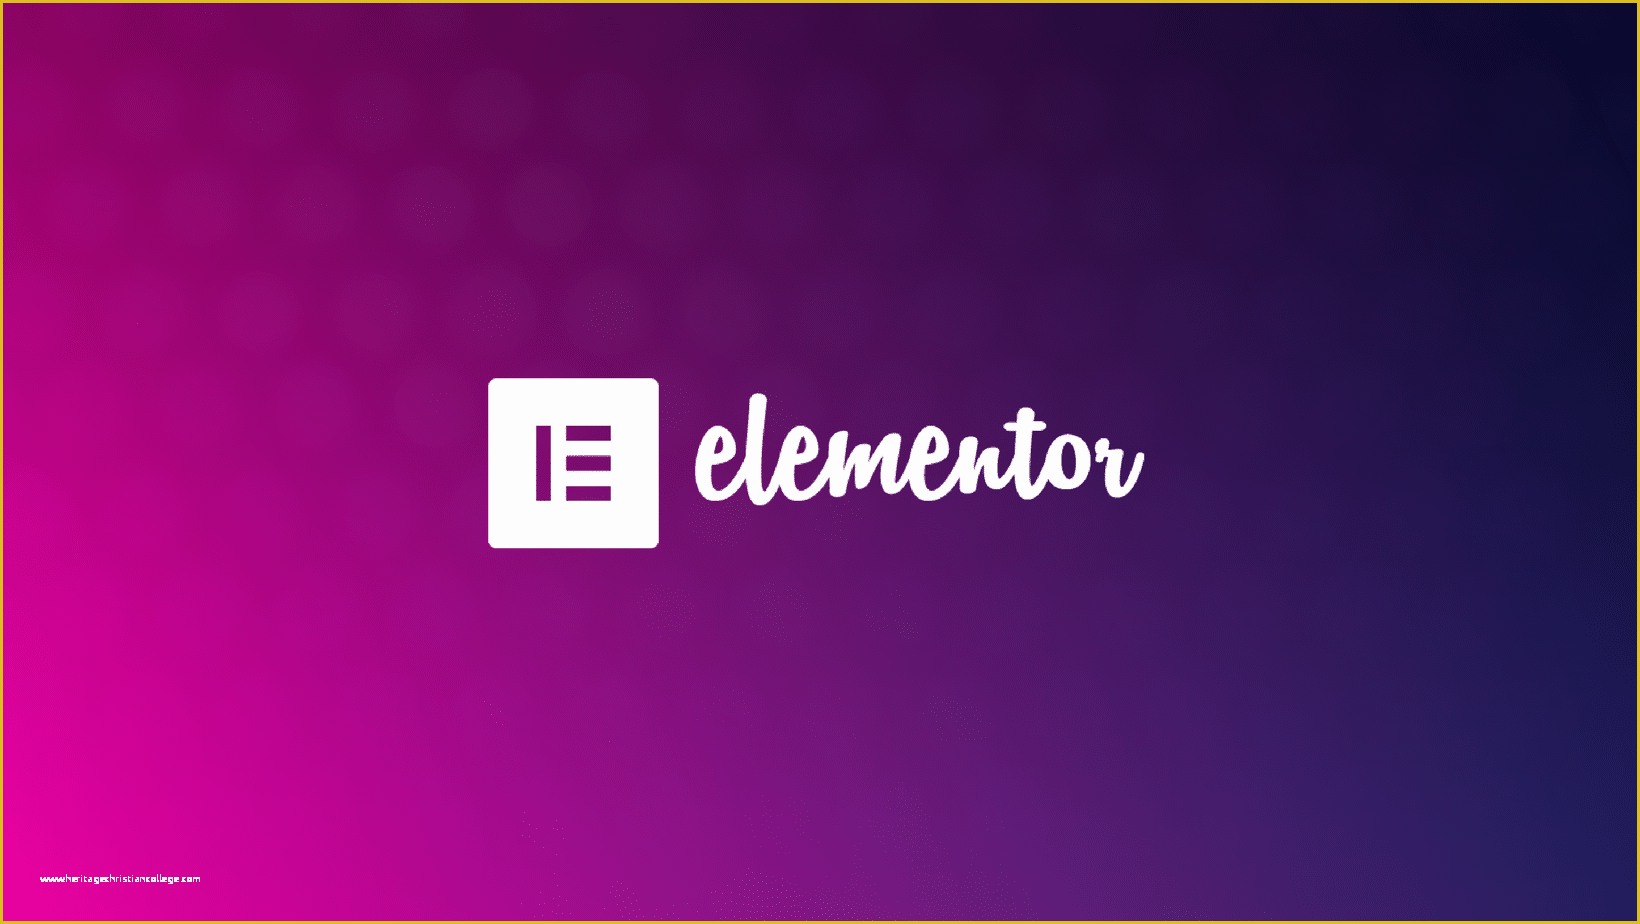 Free Elementor Templates Of Wordpress themes Learn Wordpress with Wplift